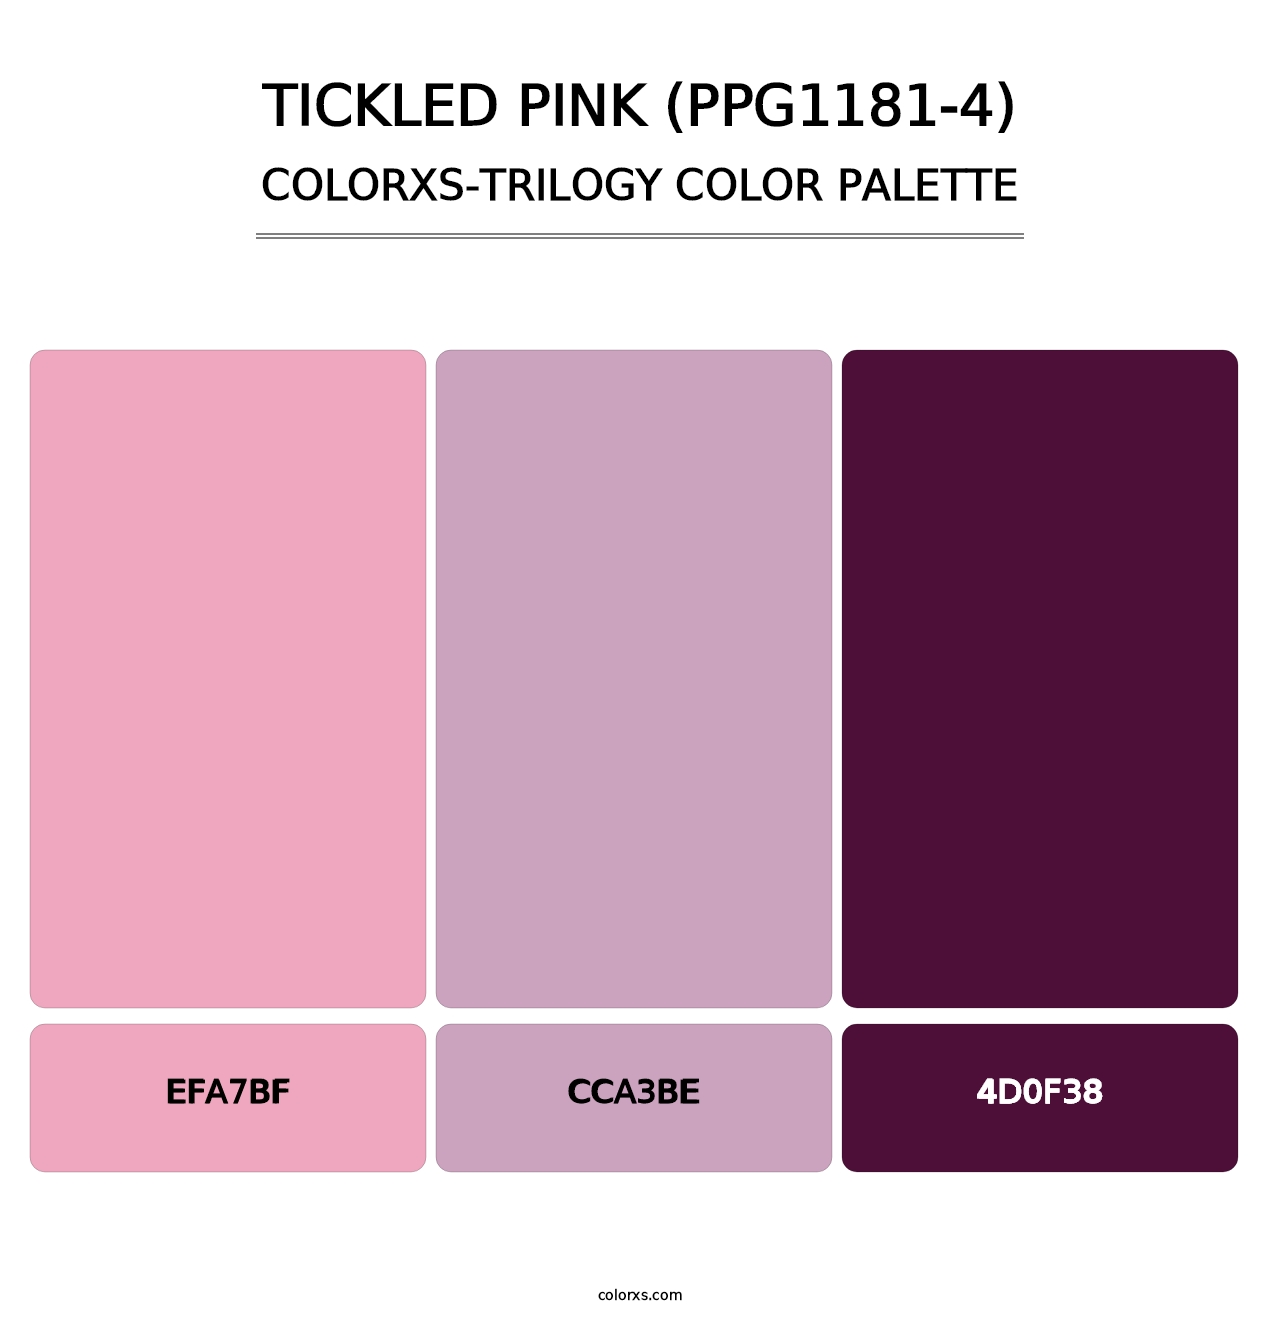 Tickled Pink (PPG1181-4) - Colorxs Trilogy Palette